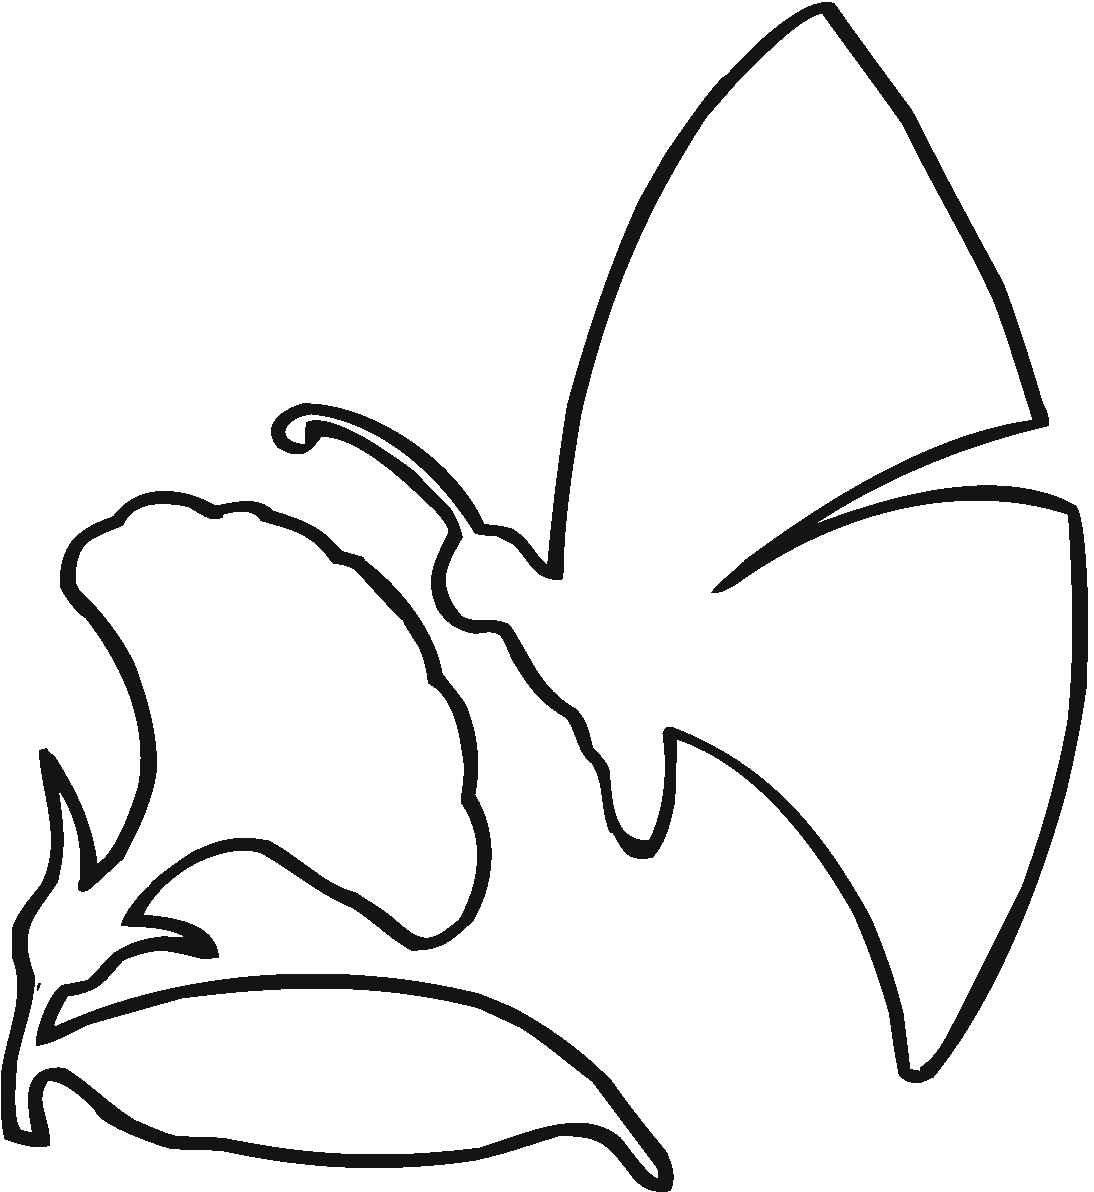 Butterfly The Flower Outline Coloring Page - Flowers Coloring ...